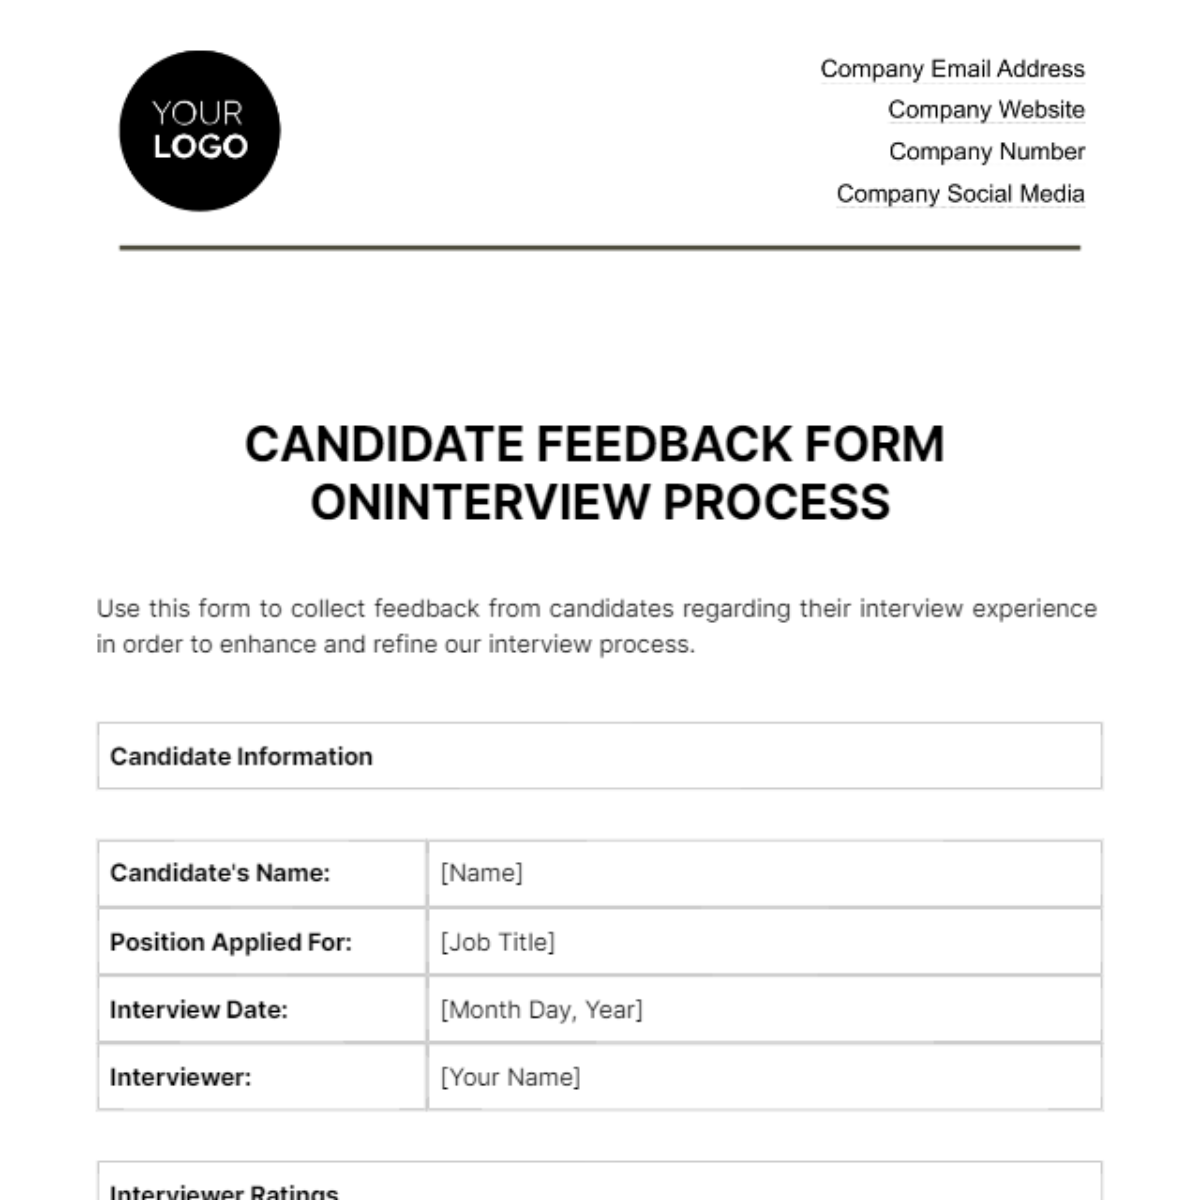 Candidate Feedback Form On Interview Process HR Template